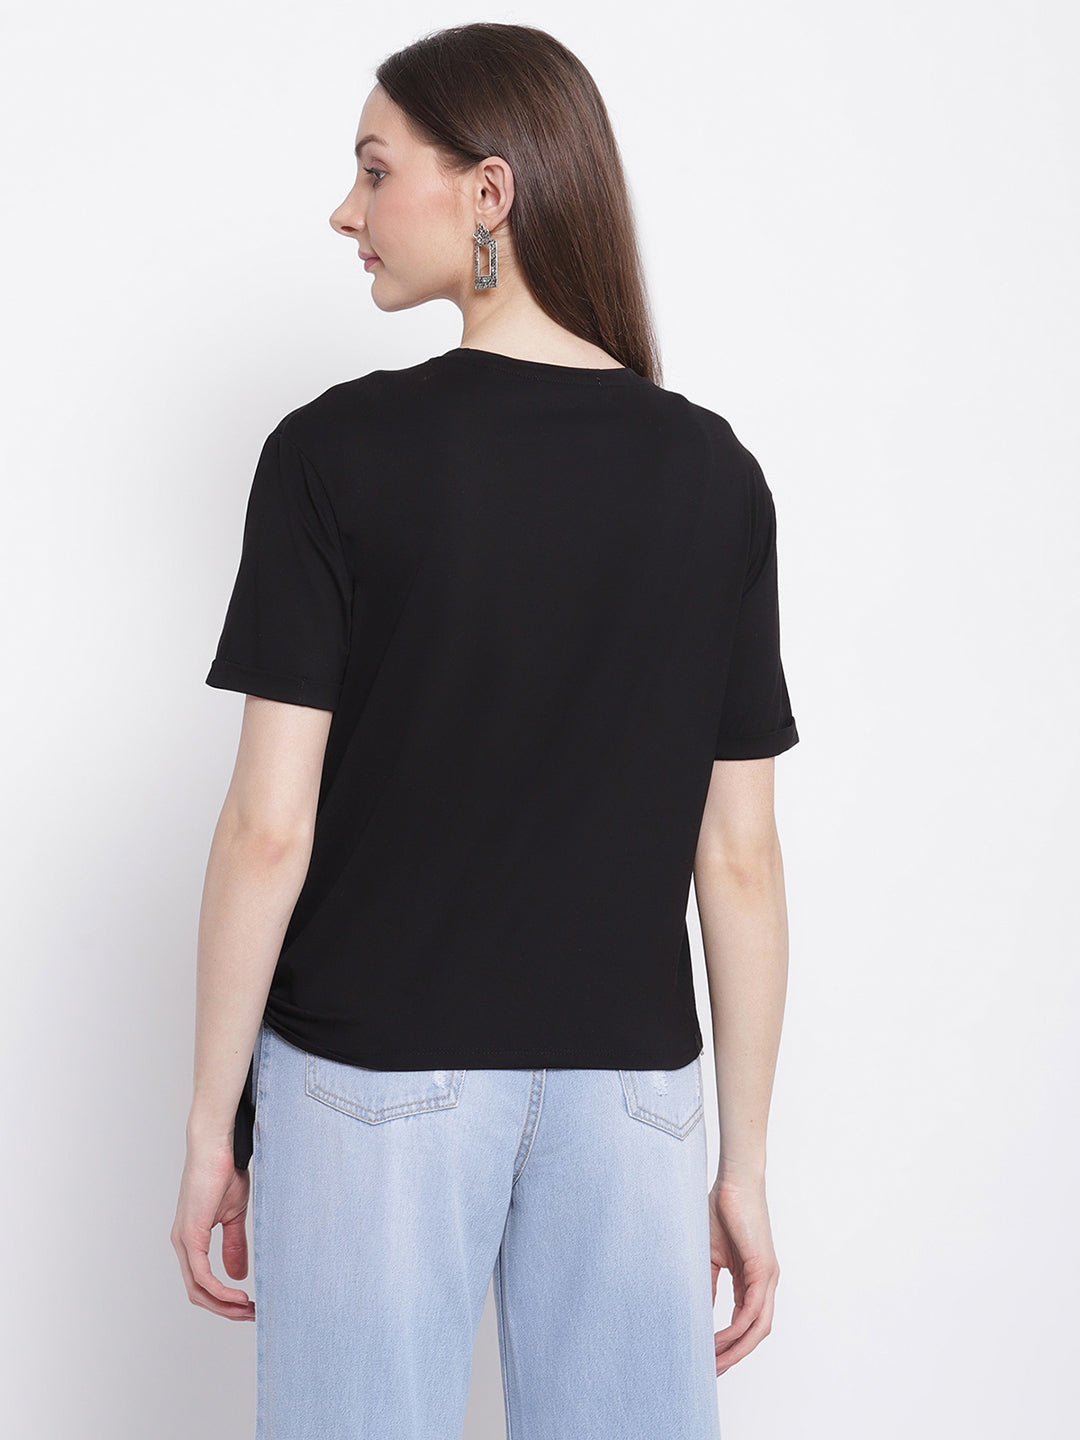 Women Black Printed Top with Knot Details at Hem